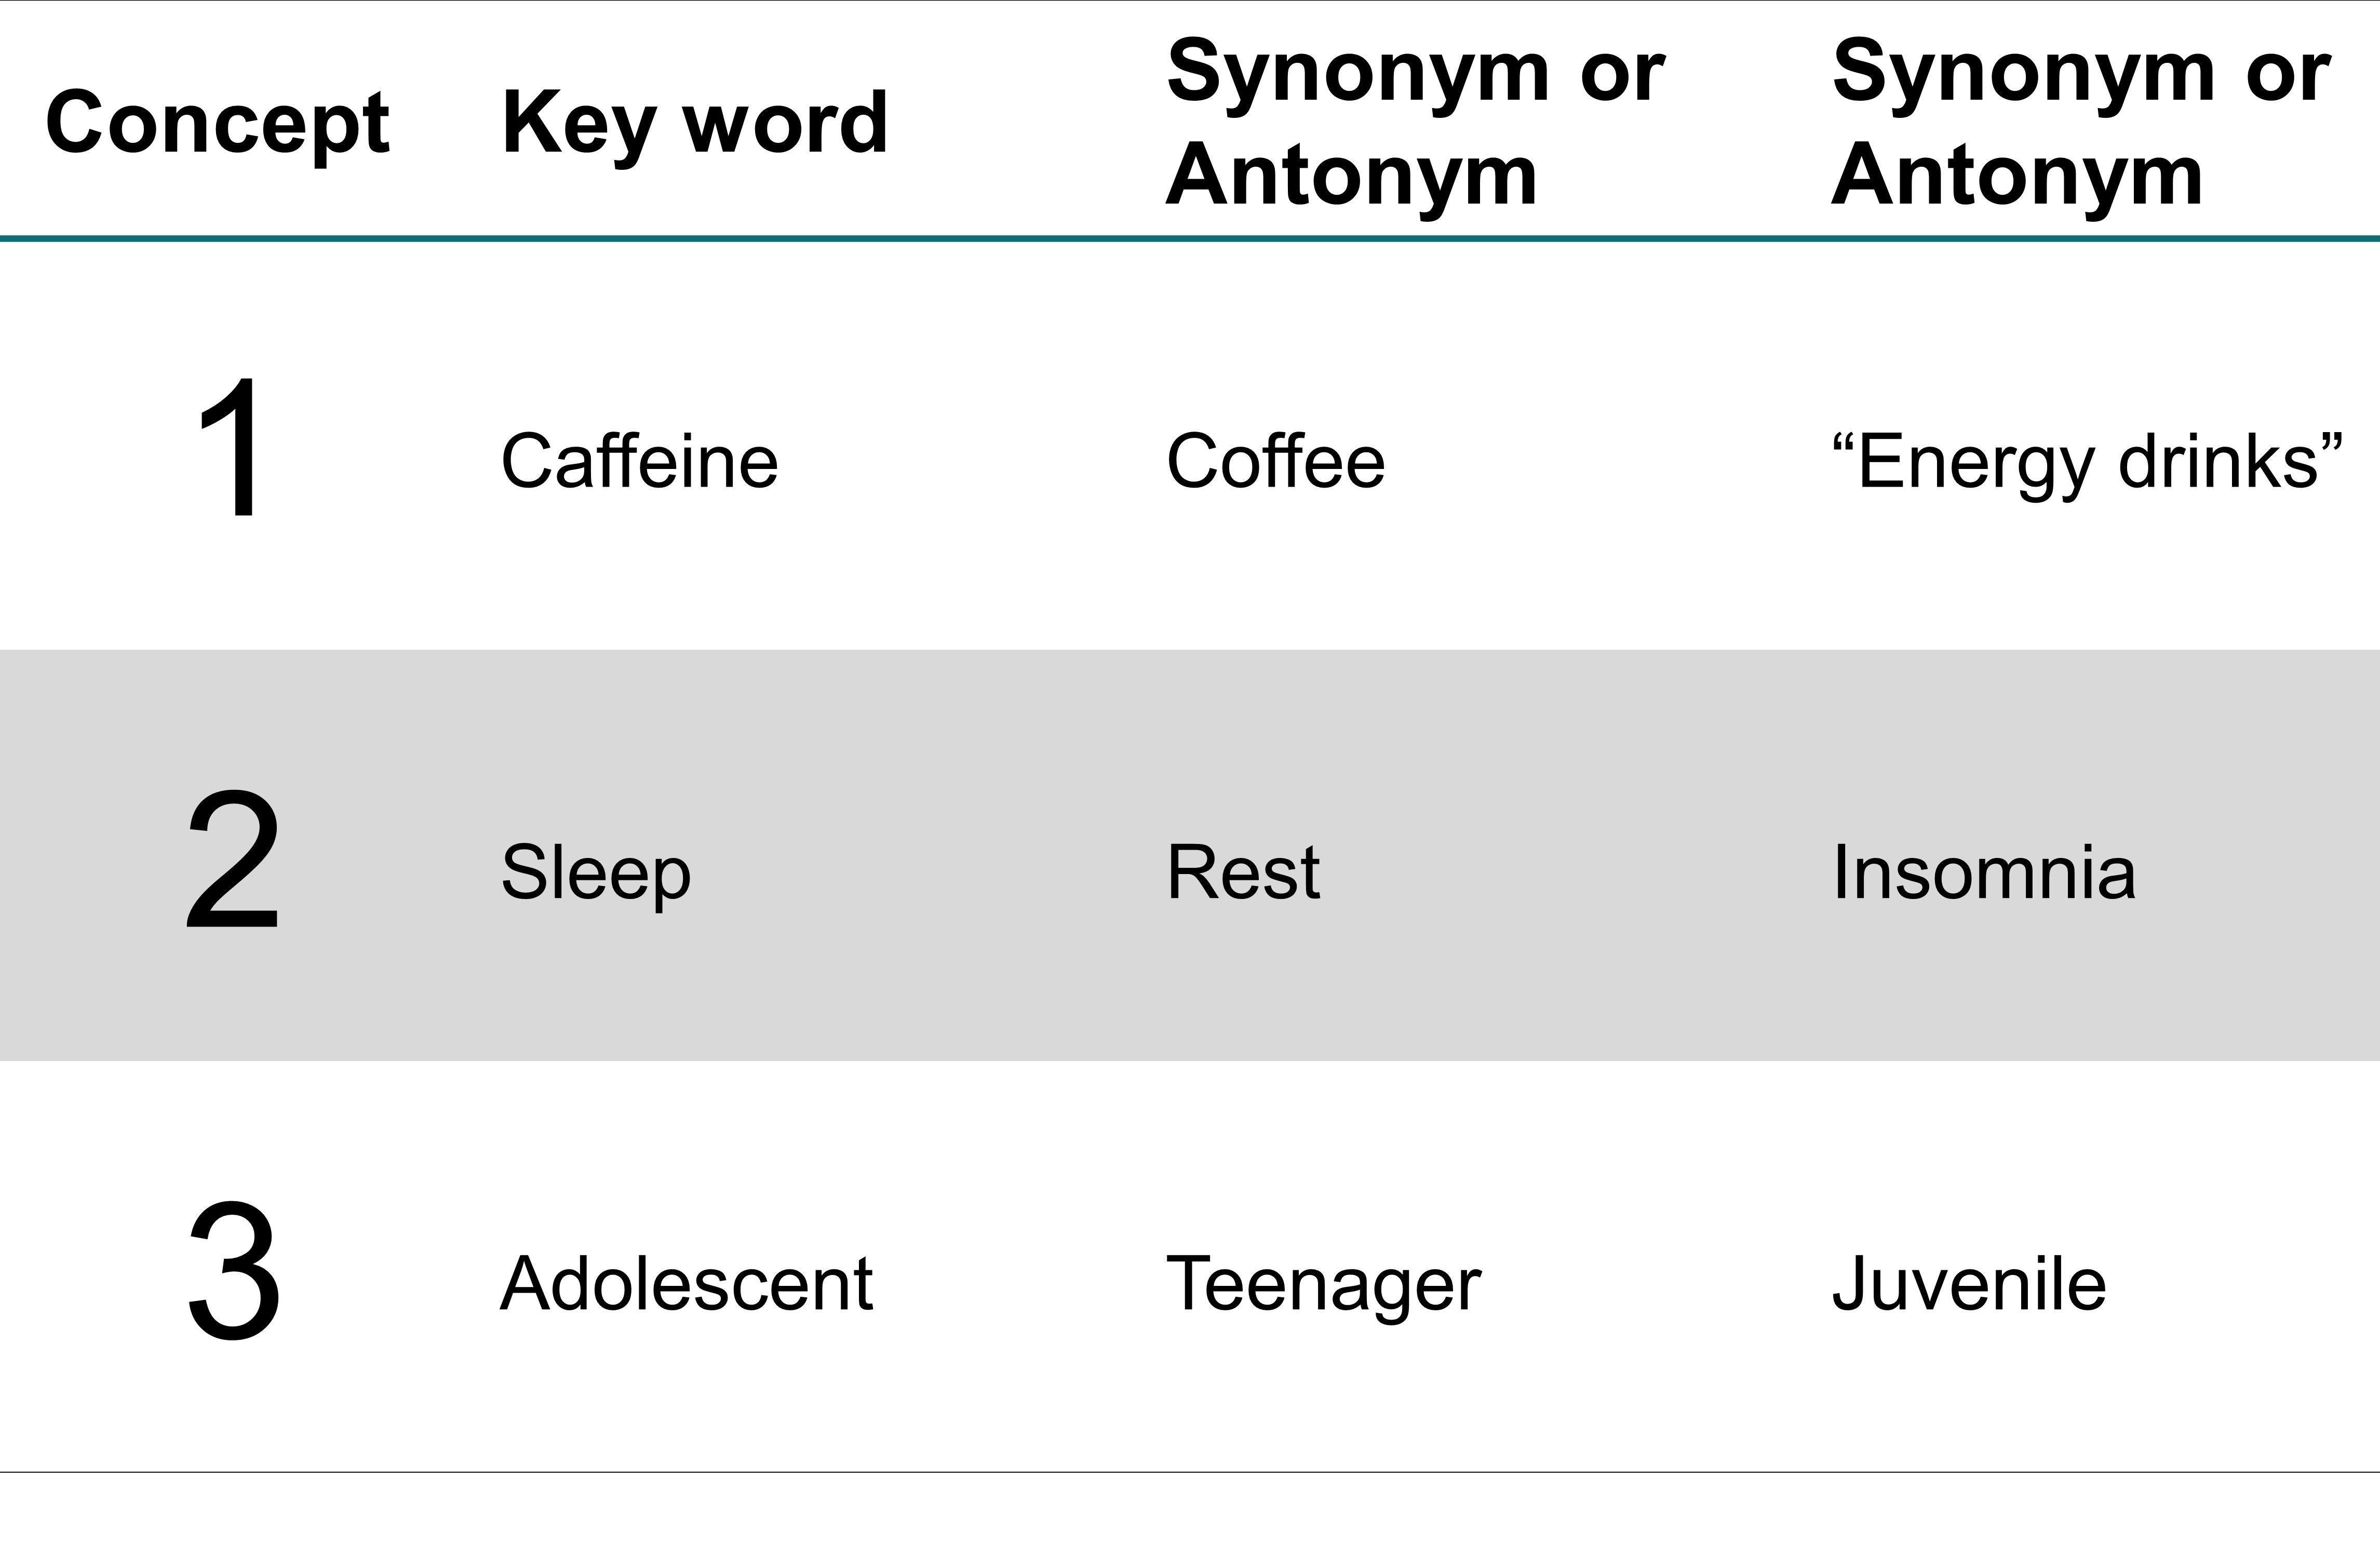 Table outlining key words and synonyms